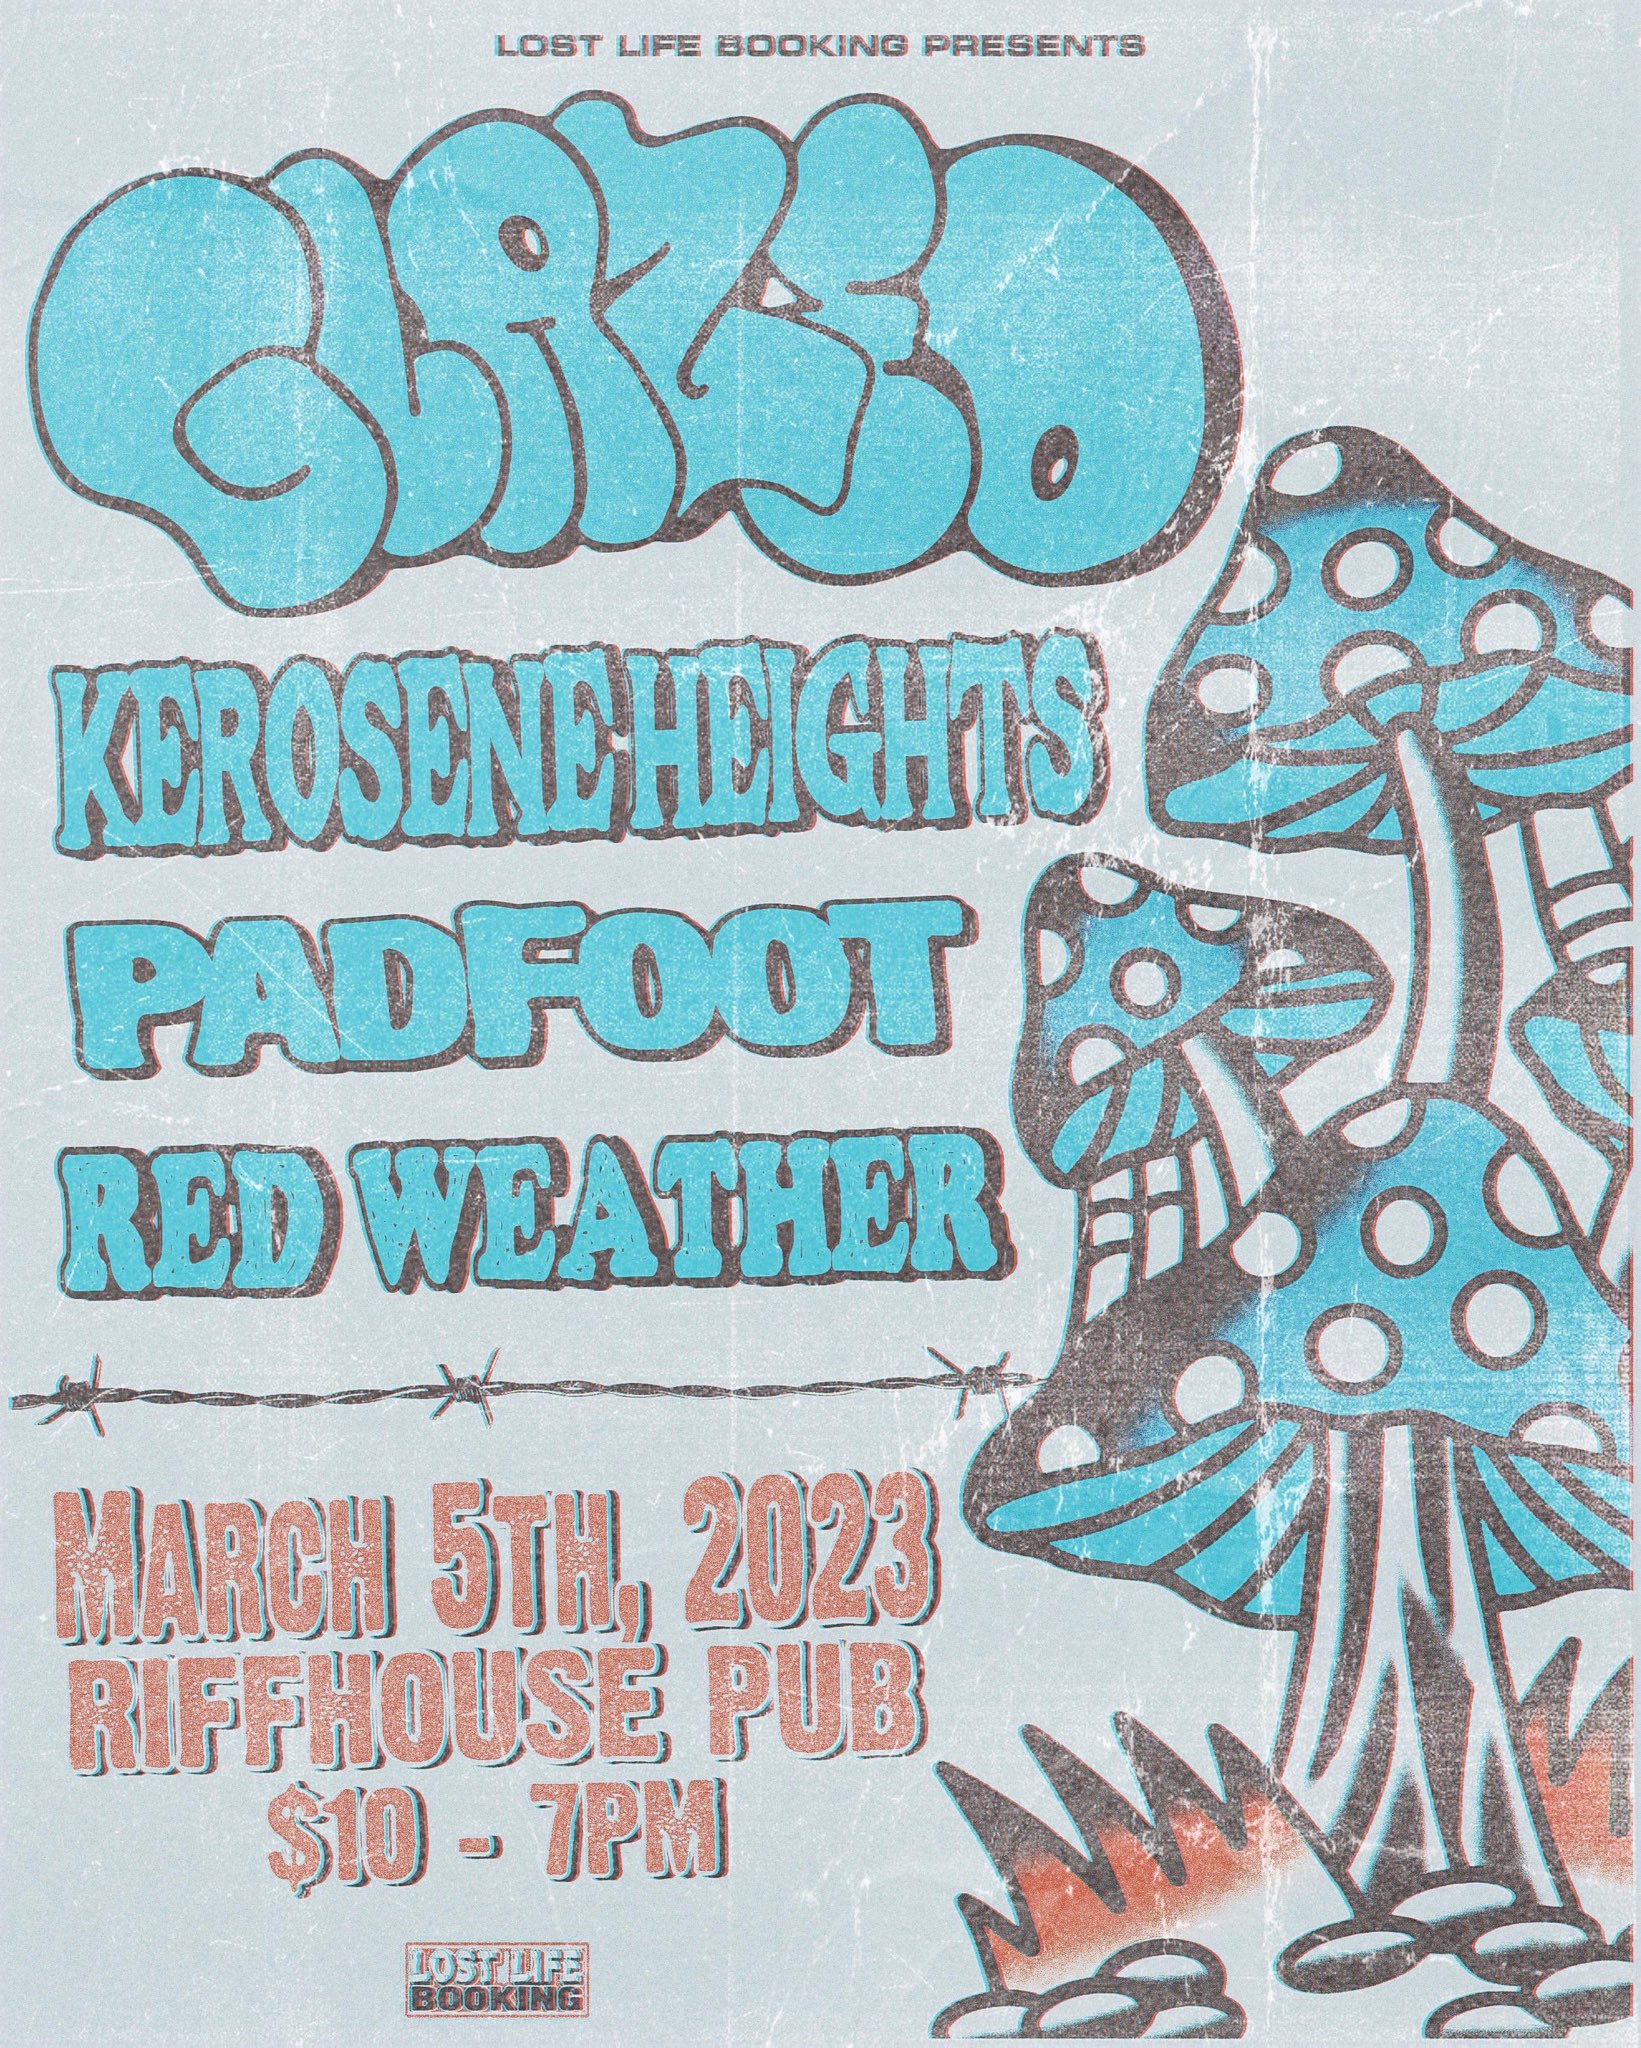 Red Weather Show Flyer March 5, 2023